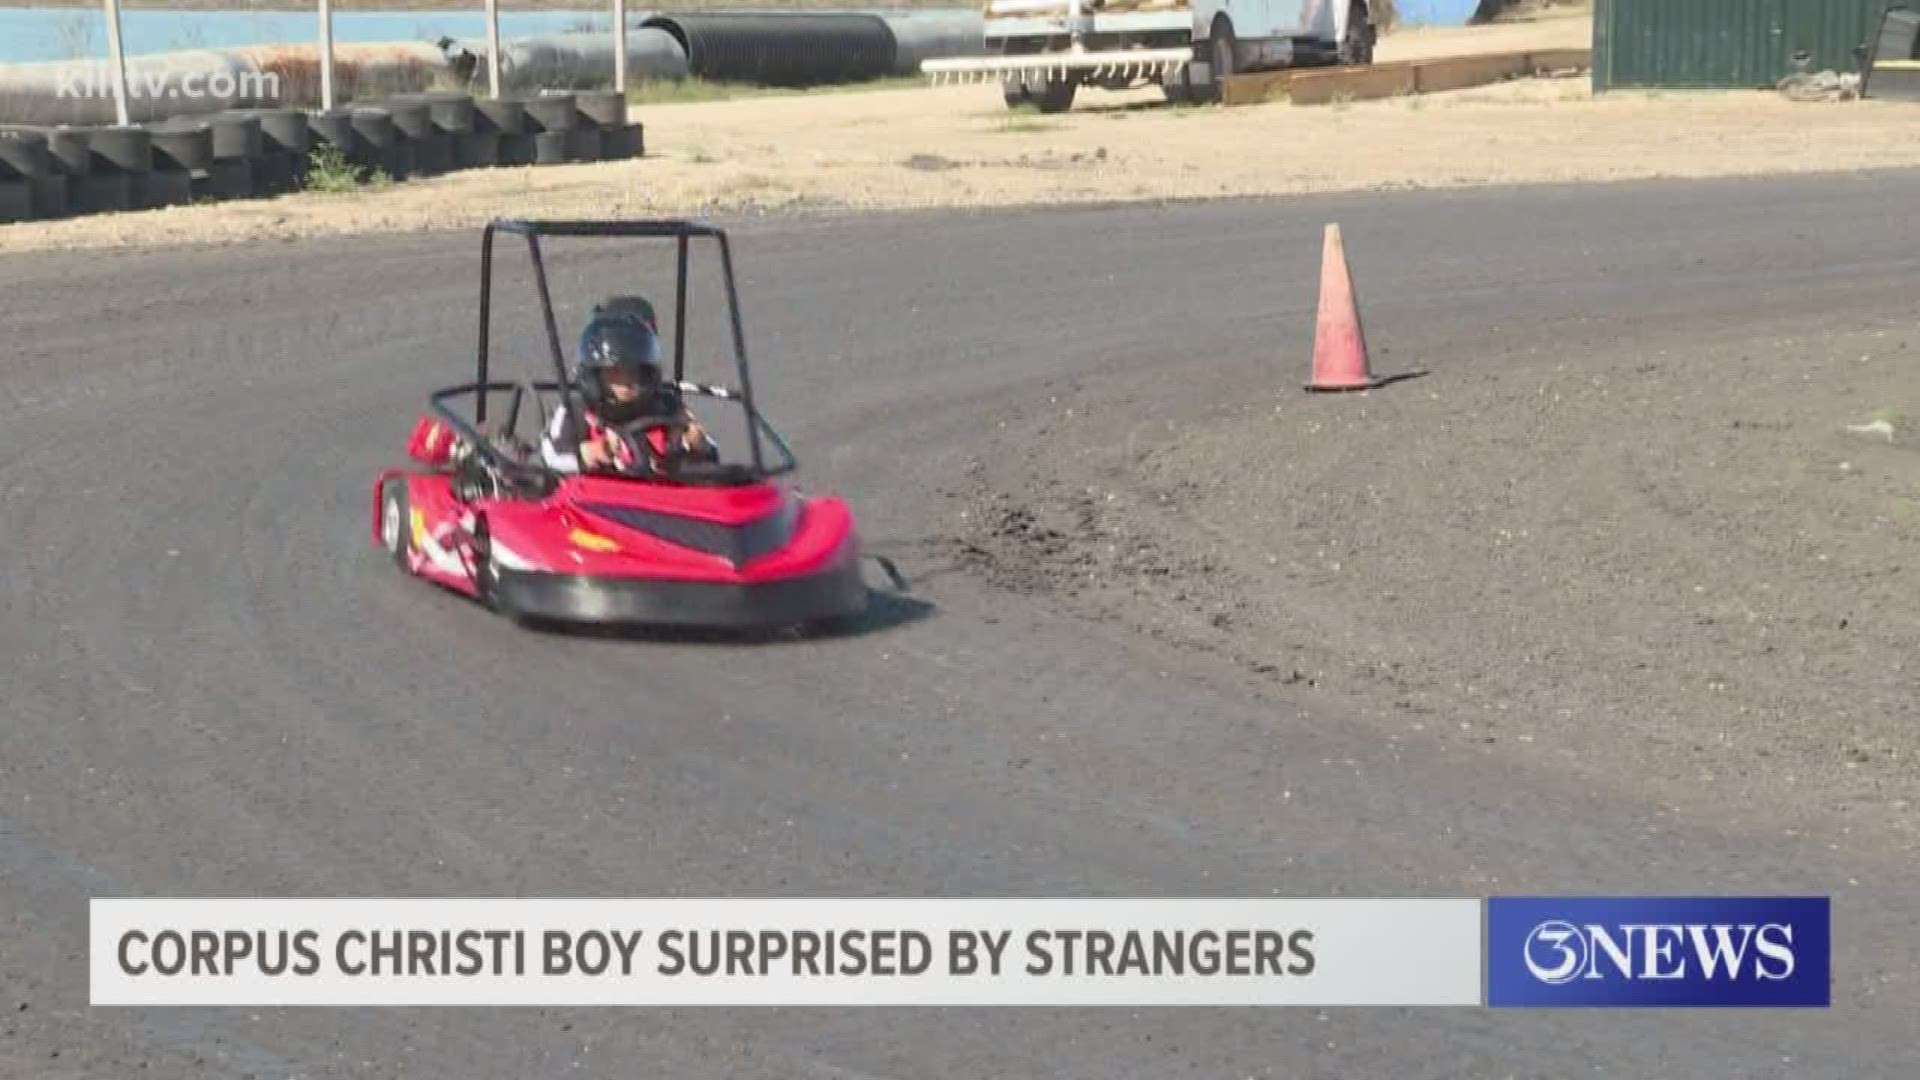 Kenny Smith's go-kart was stolen in early December 2019